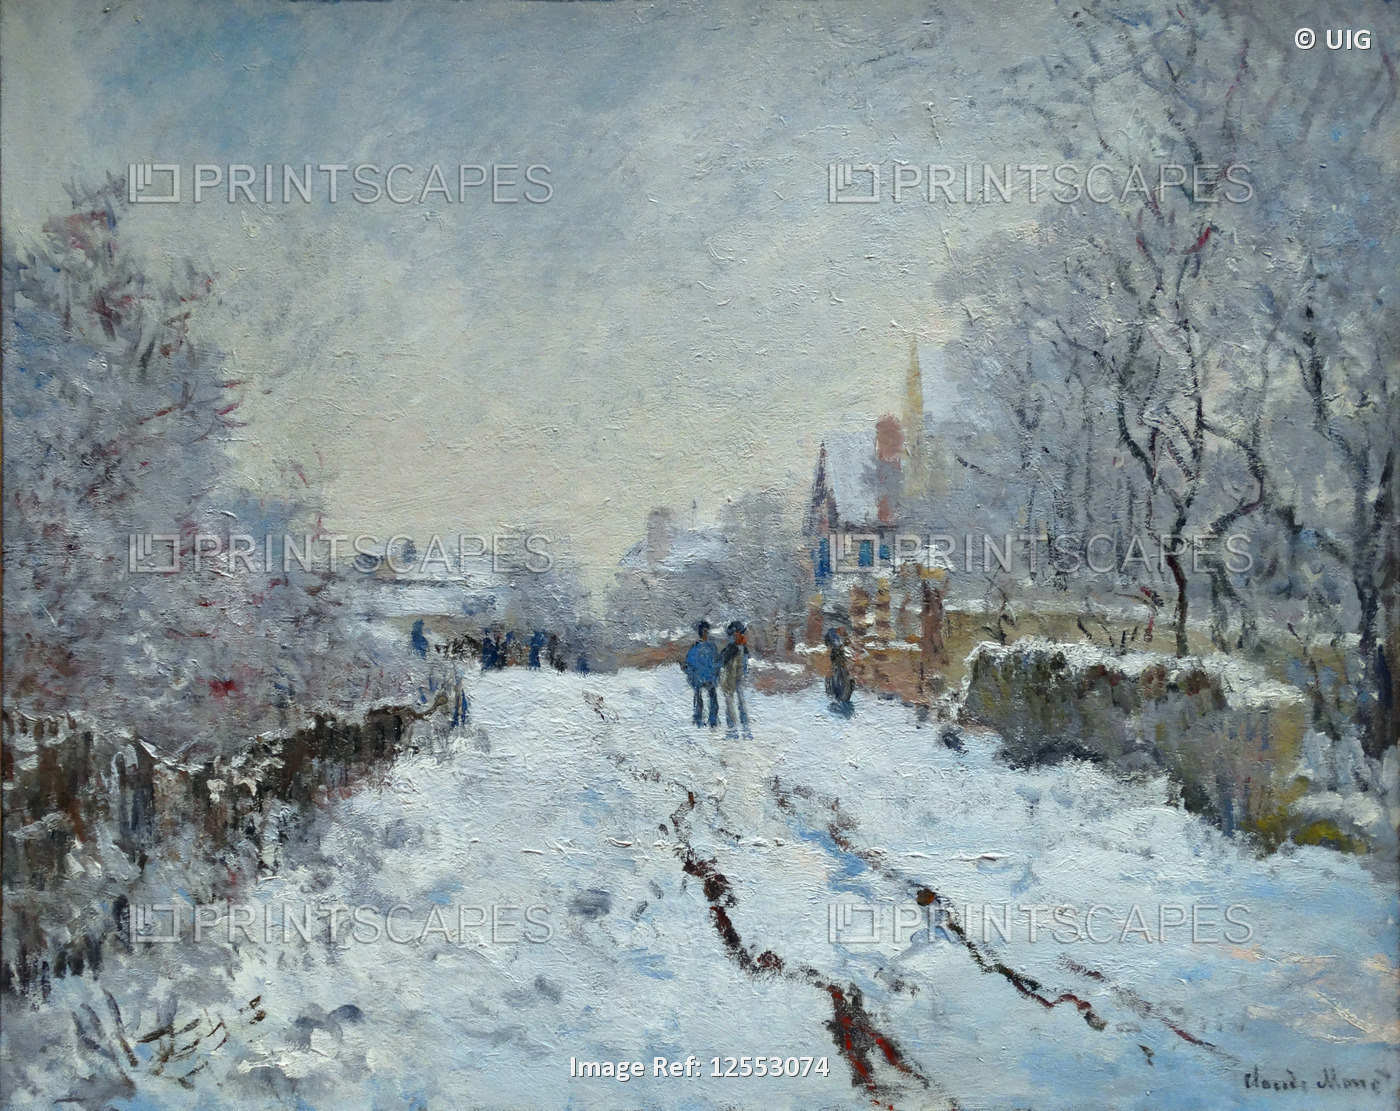 Painting titled 'Snow scene at Argenteuil' by Claude Monet, dated 1875